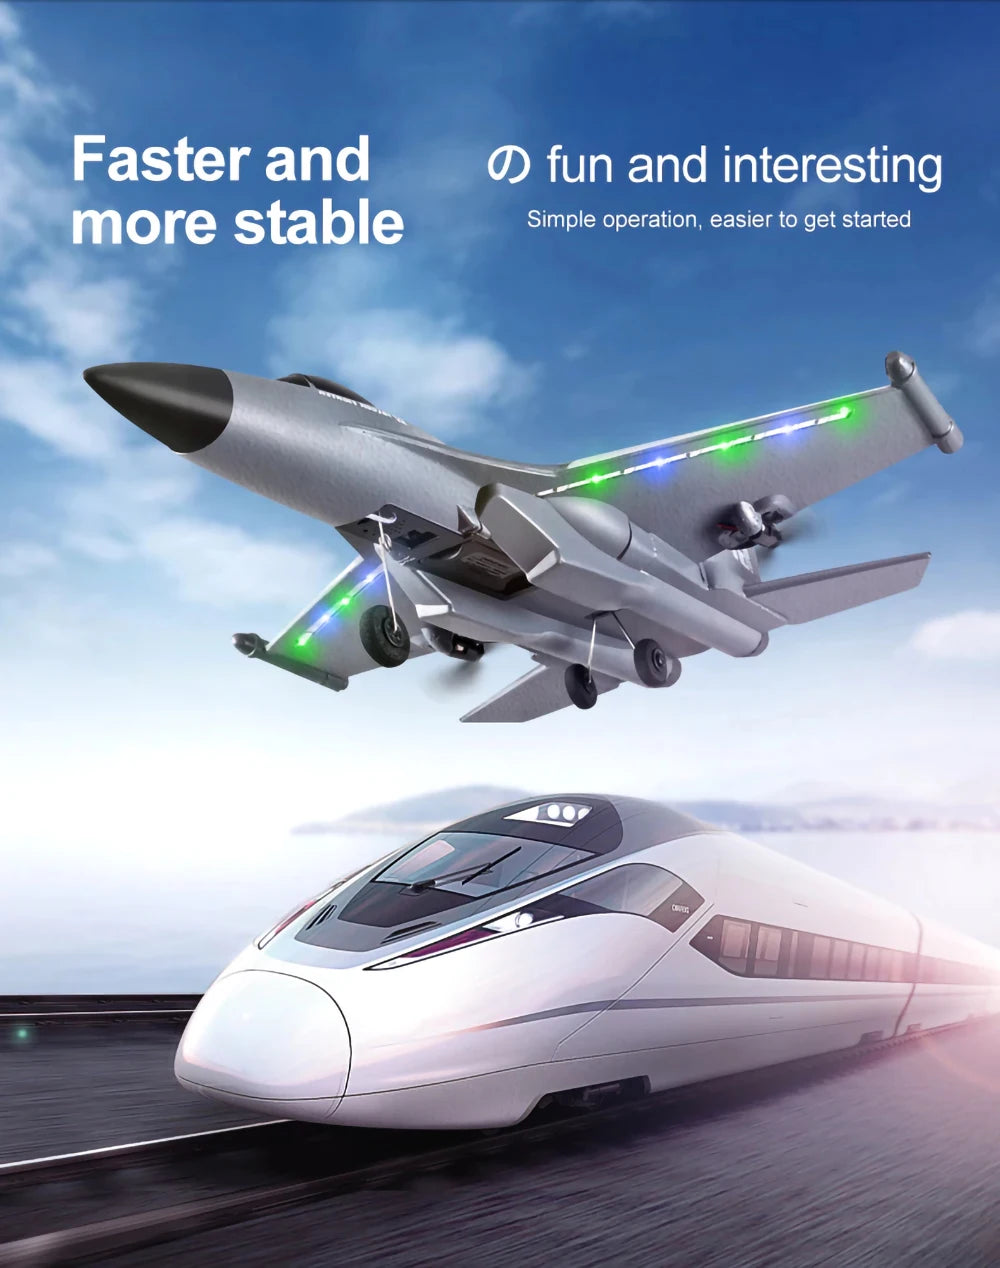 RC283 RC Airplane, Faster and 0) fun and interesting more stable Easy operation, easier to get